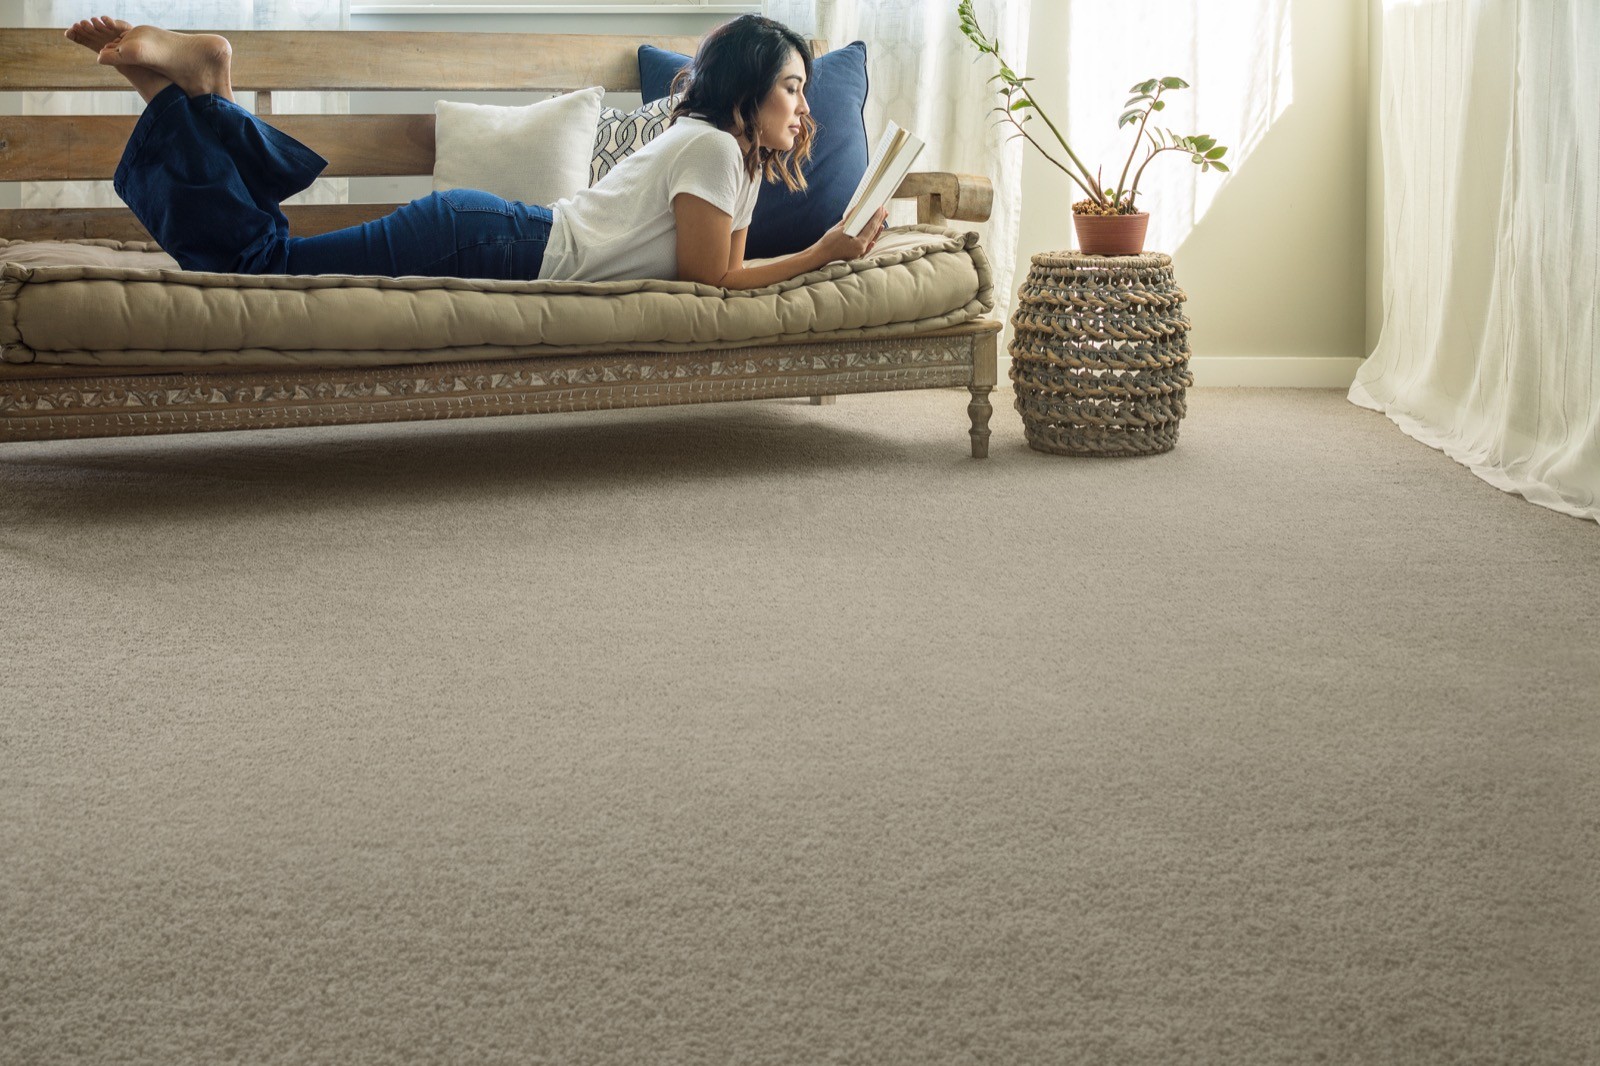 Lady reading book | West River Carpets